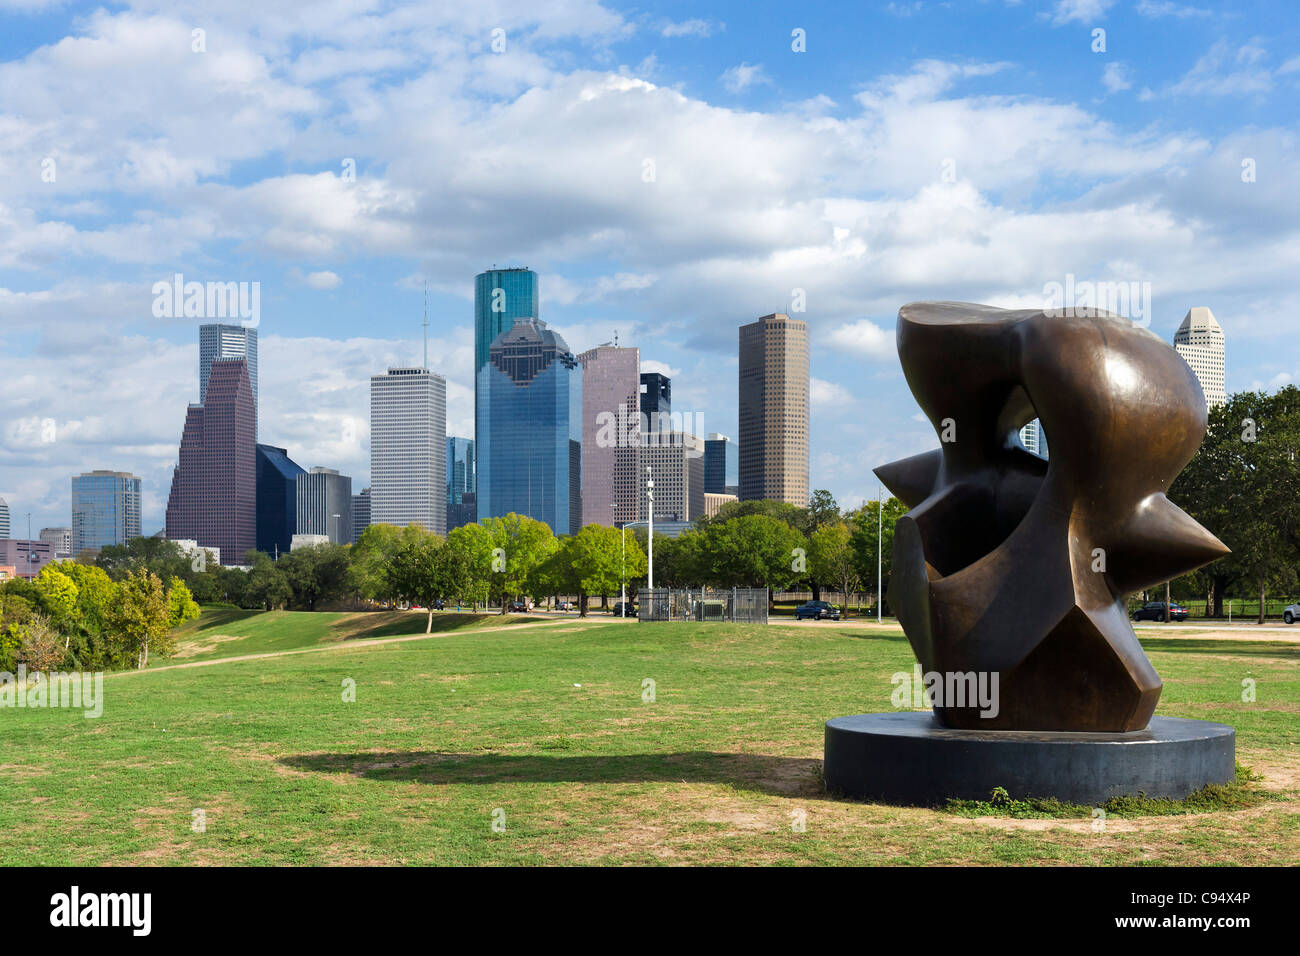 City skyline with Large Spindle Piece sculpture by Henry Moore in foreground, Allen Parkway, Houston, Texas, USA Stock Photo